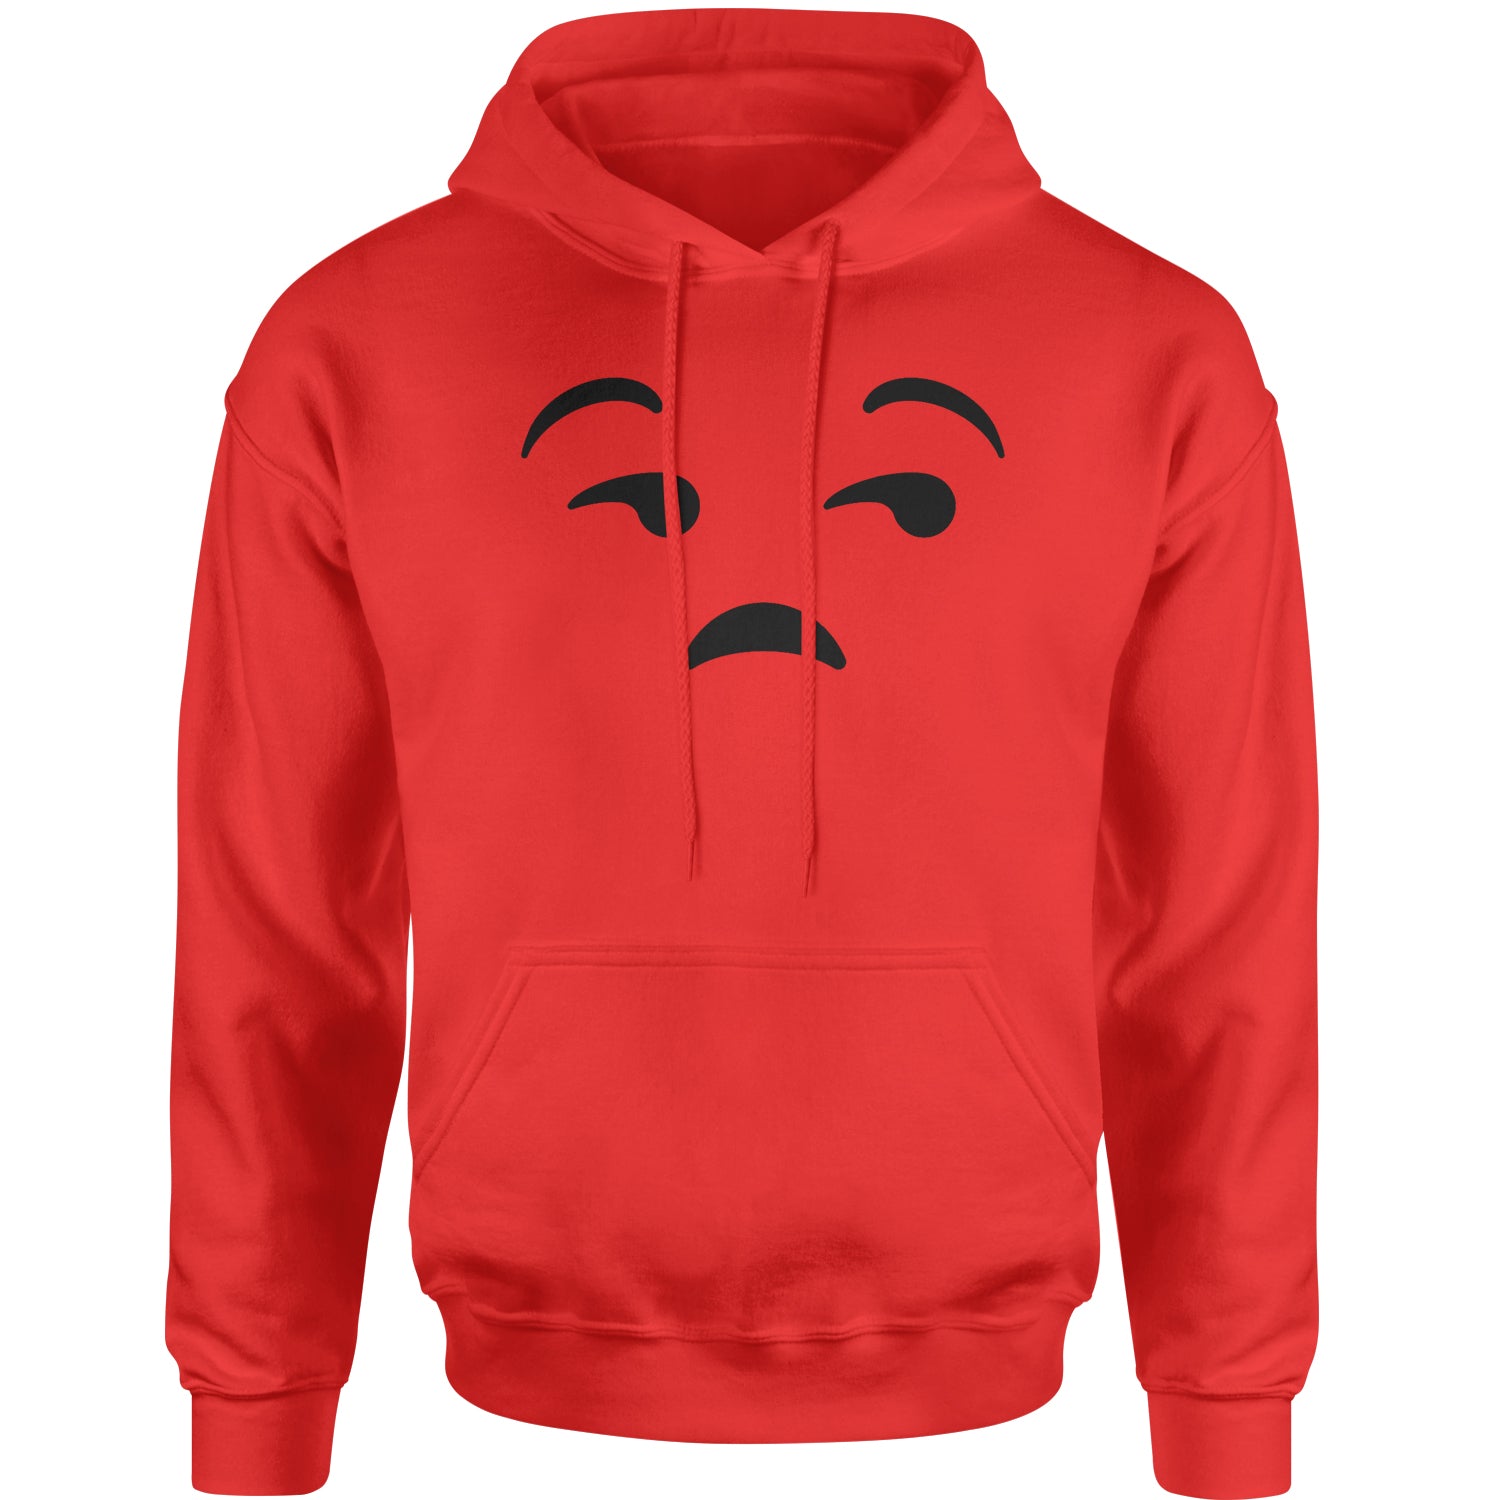 Emoticon Whatever Smile Face Adult Hoodie Sweatshirt cosplay, costume, dress, emoji, emote, face, halloween, smiley, up, yellow by Expression Tees